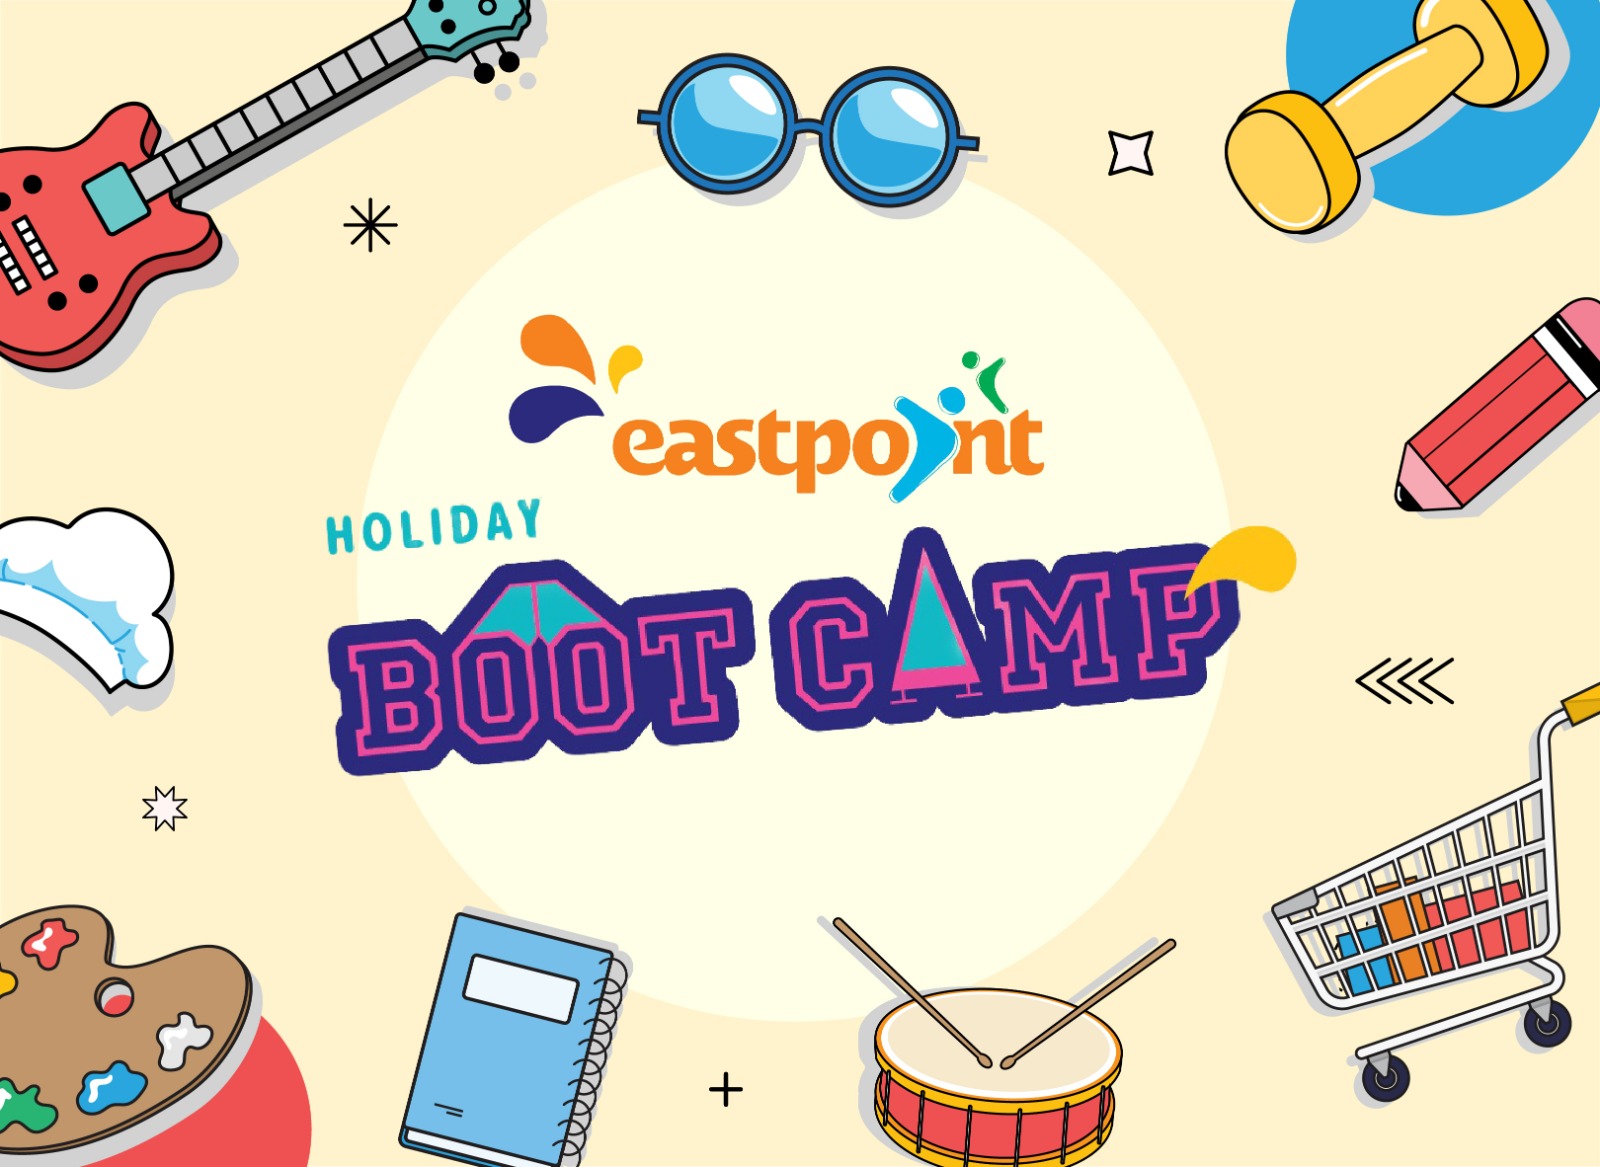 EP Kids Holiday Boot Camp at Eastpoint Mall